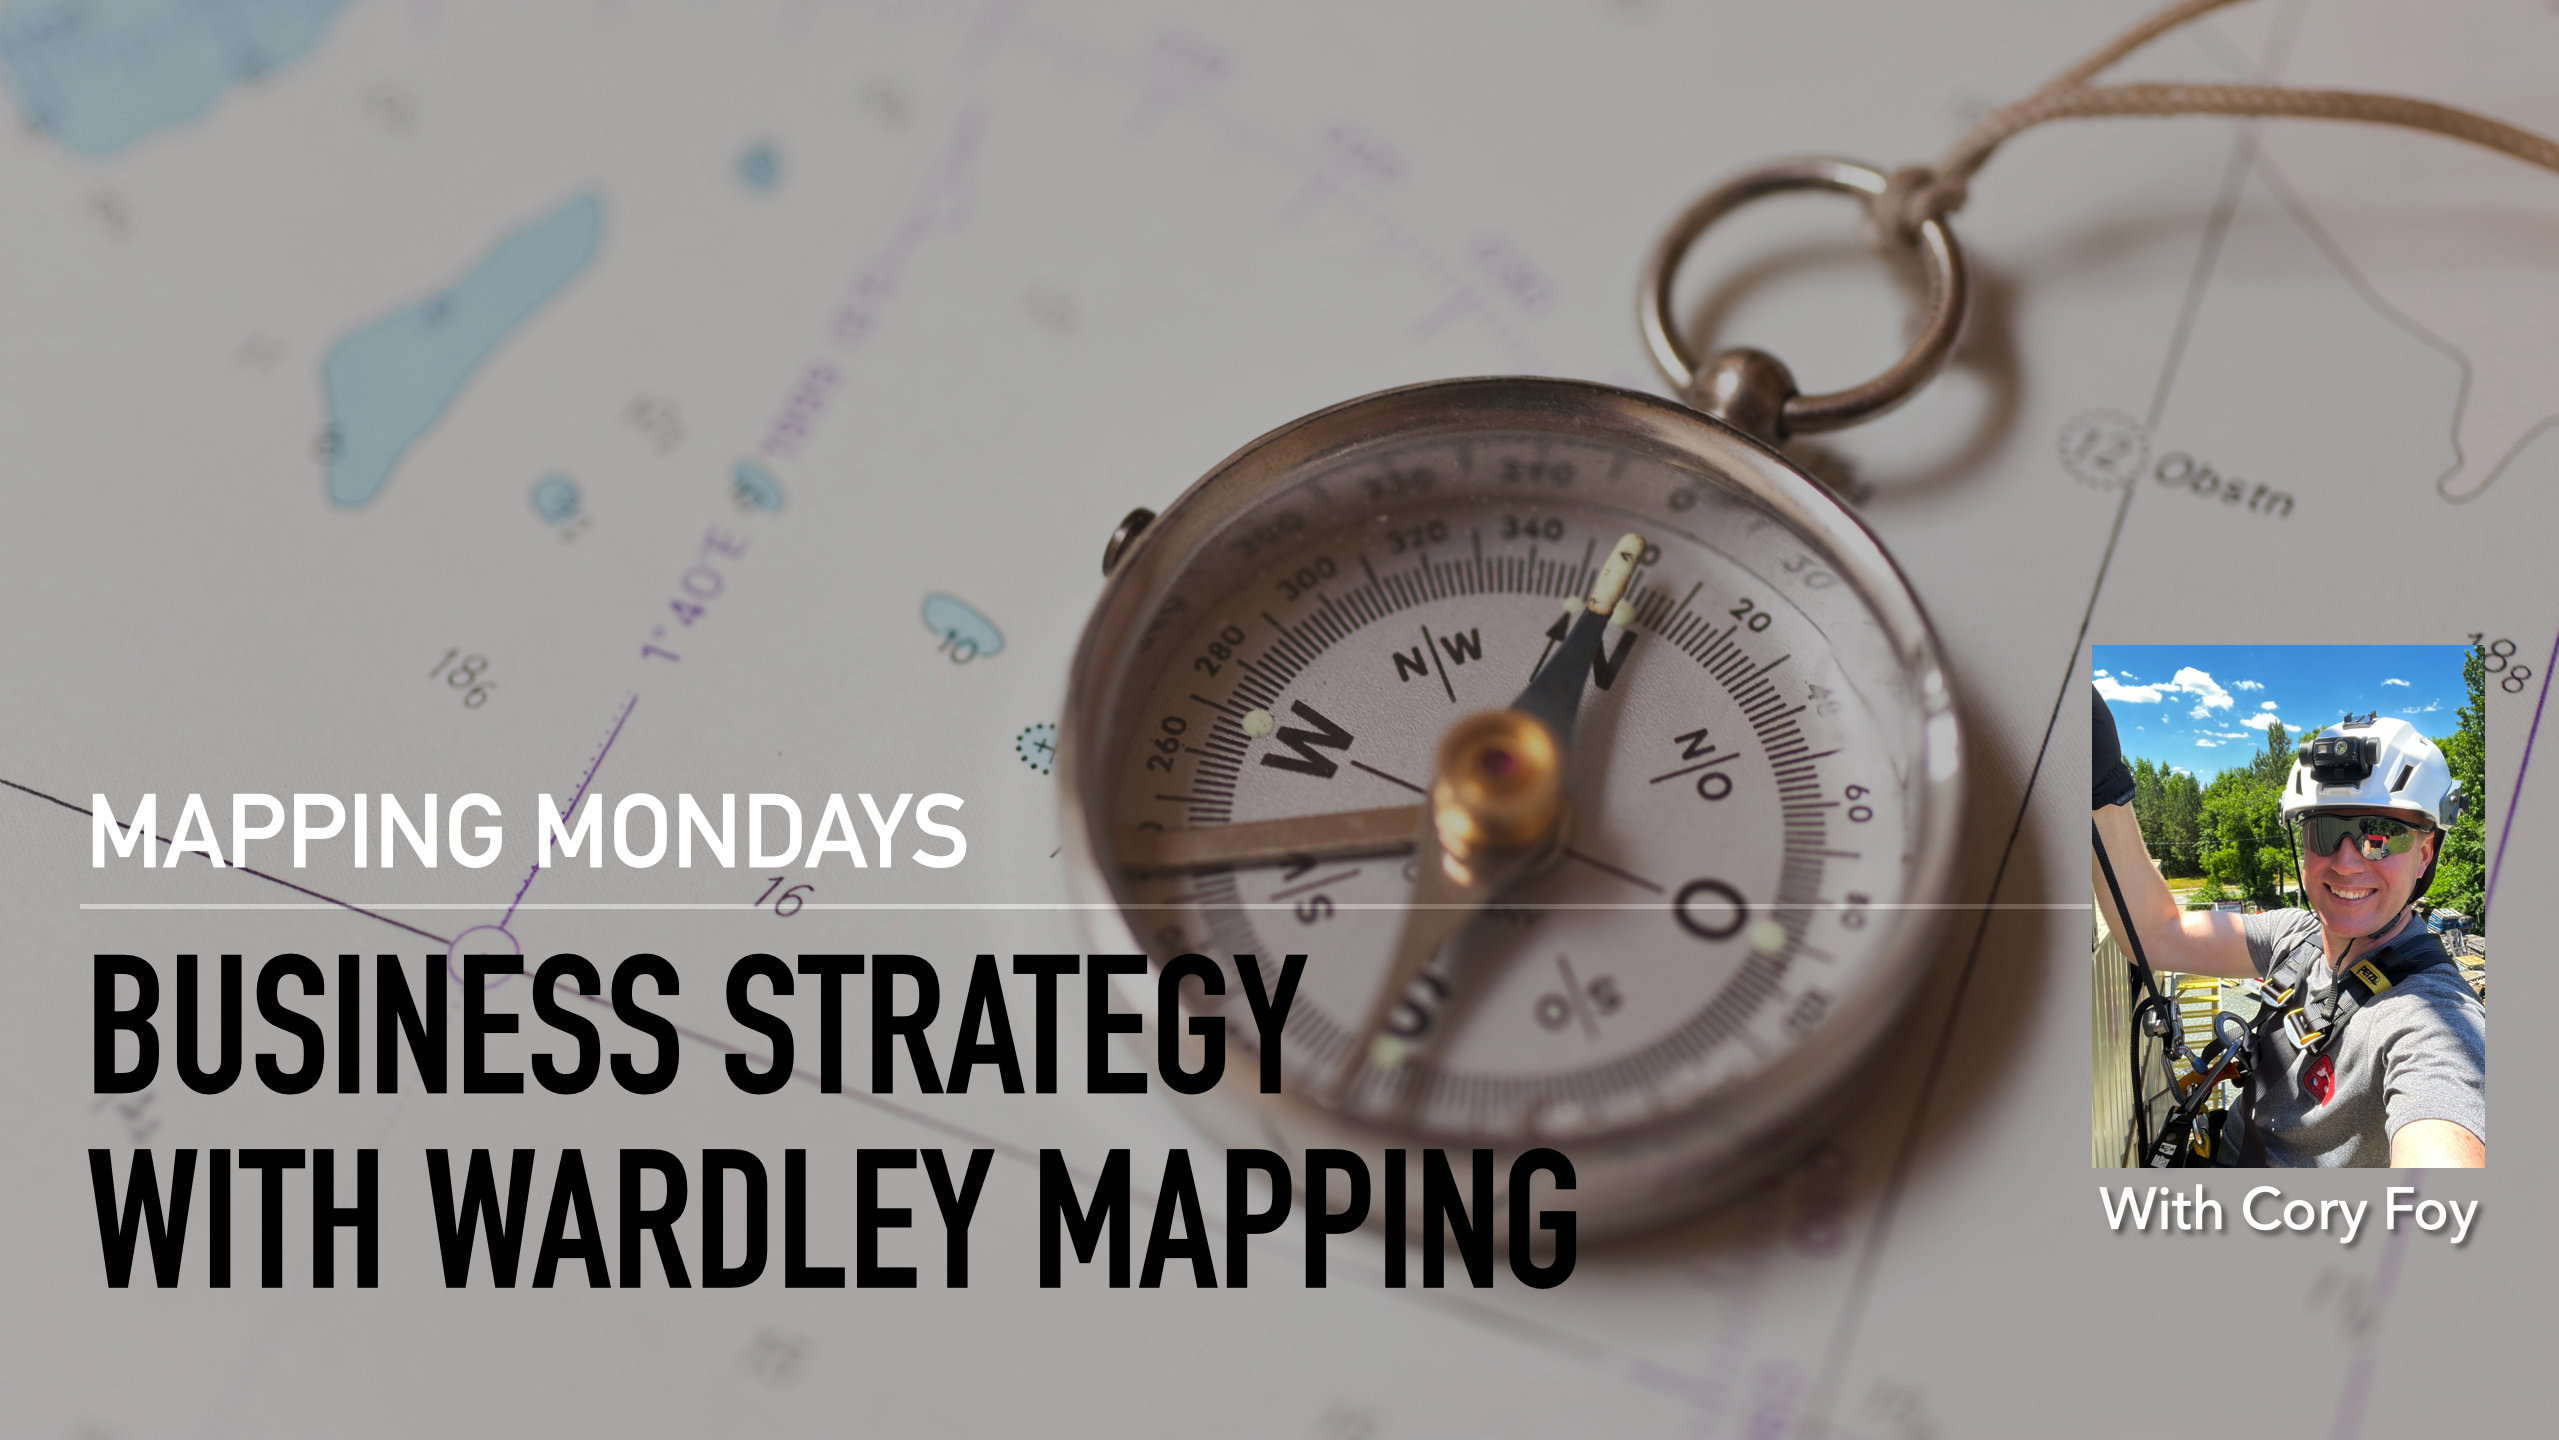 Mapping Mondays: Business Strategy with Wardley Mapping